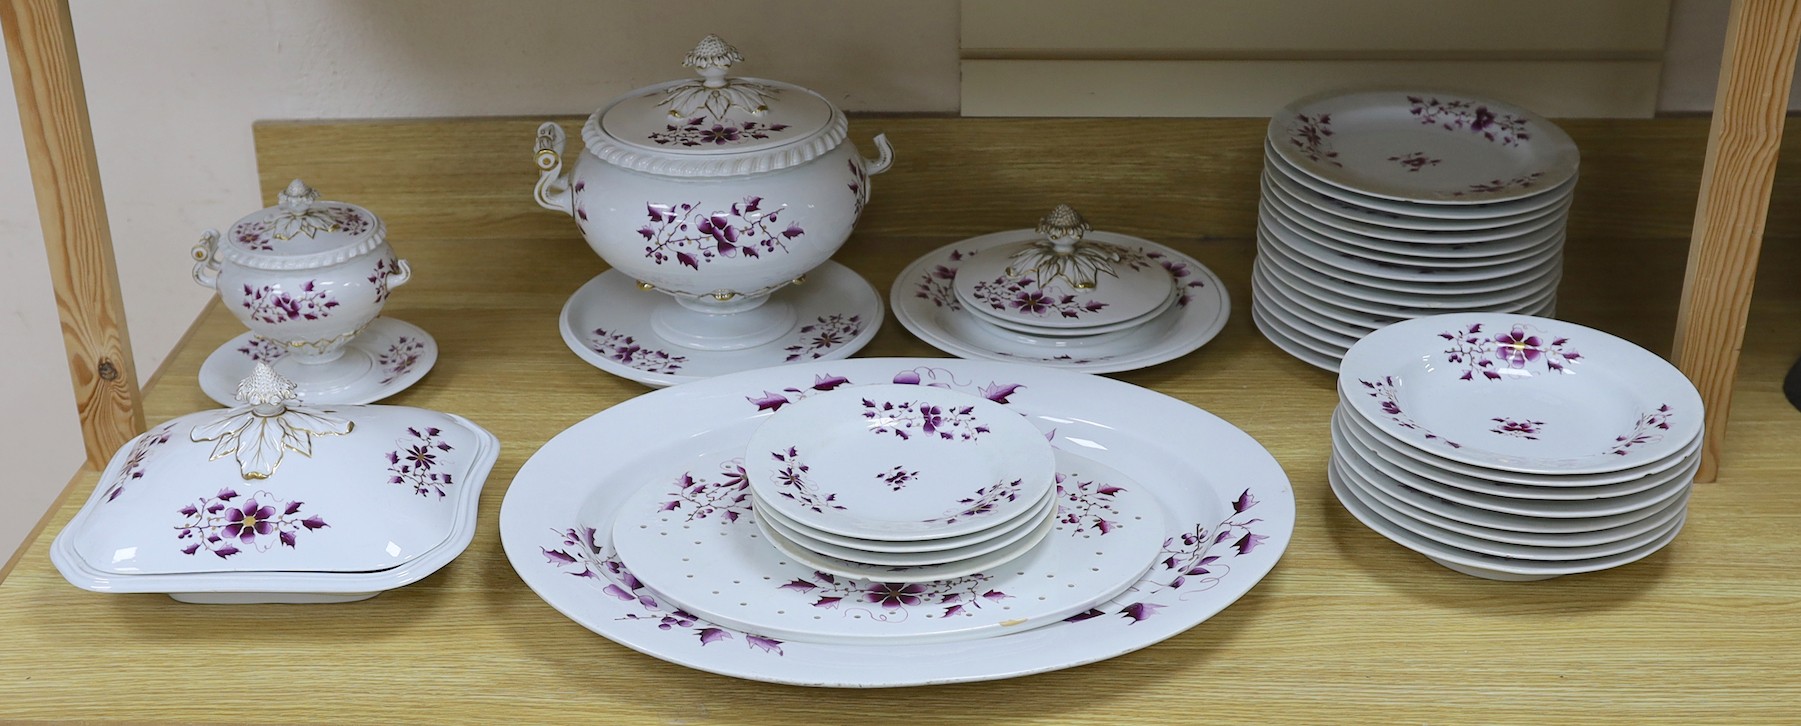 A Flight Barr and Barr floral and gilt decorated part dinner service